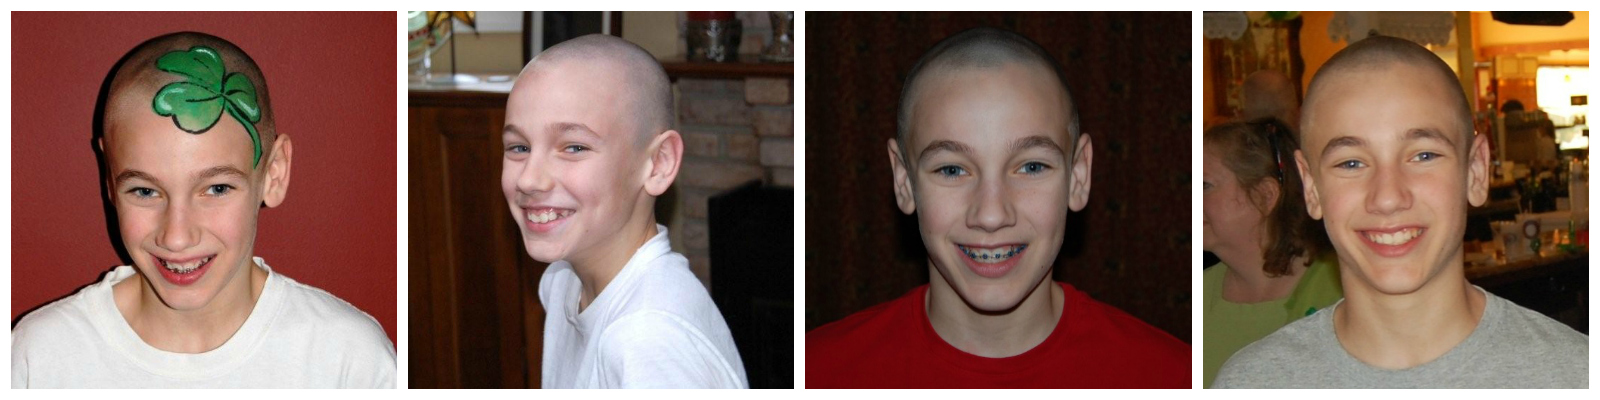 Aaron braved the shave for four years before being diagnosed with childhood cancer